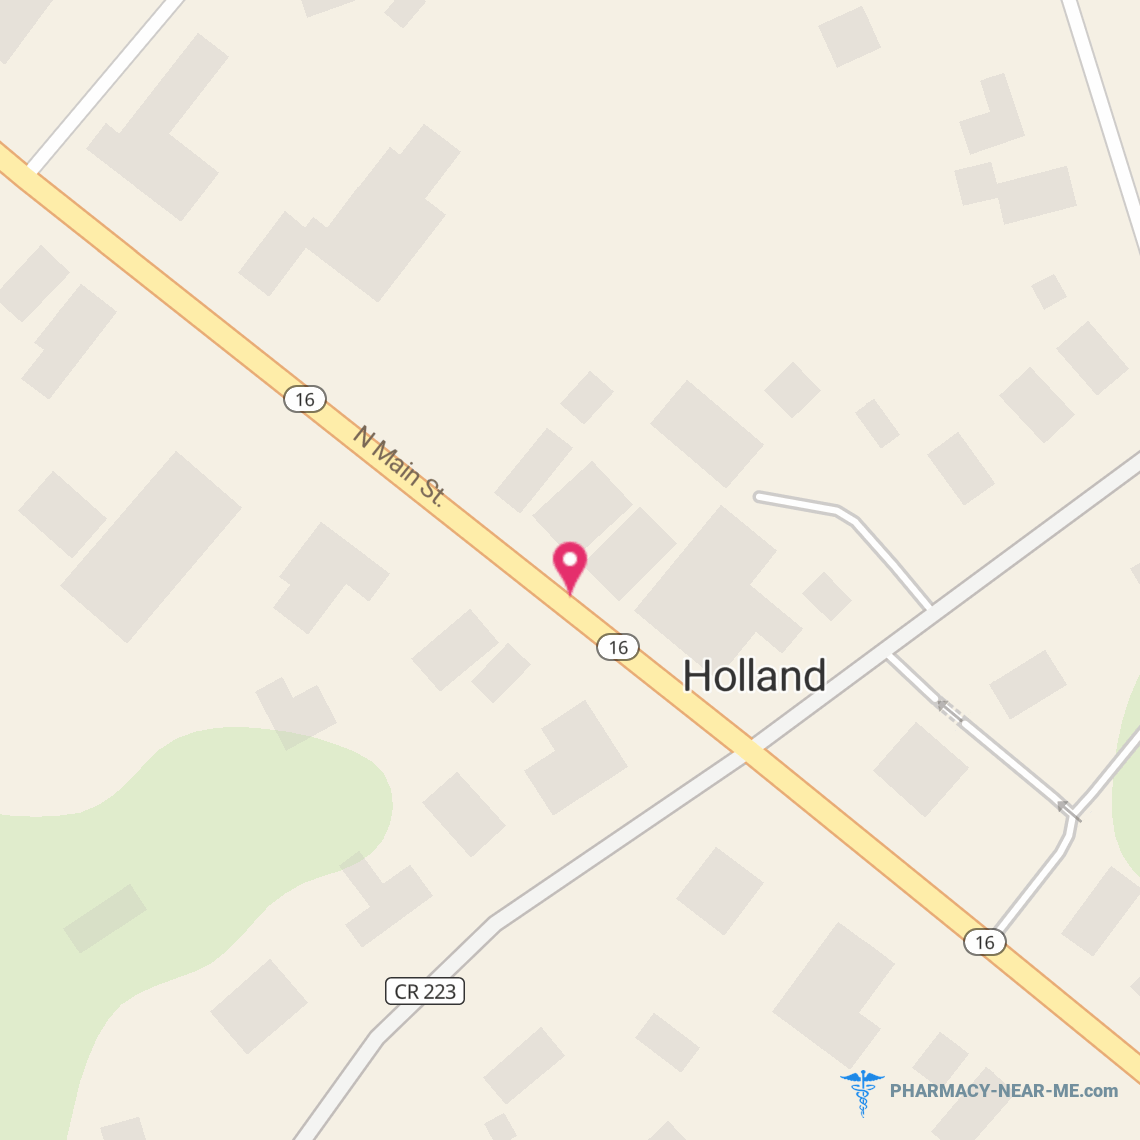 HOLLAND PHARMACY INC - Pharmacy Hours, Phone, Reviews & Information: 19 North Main Street, Holland, New York 14080, United States